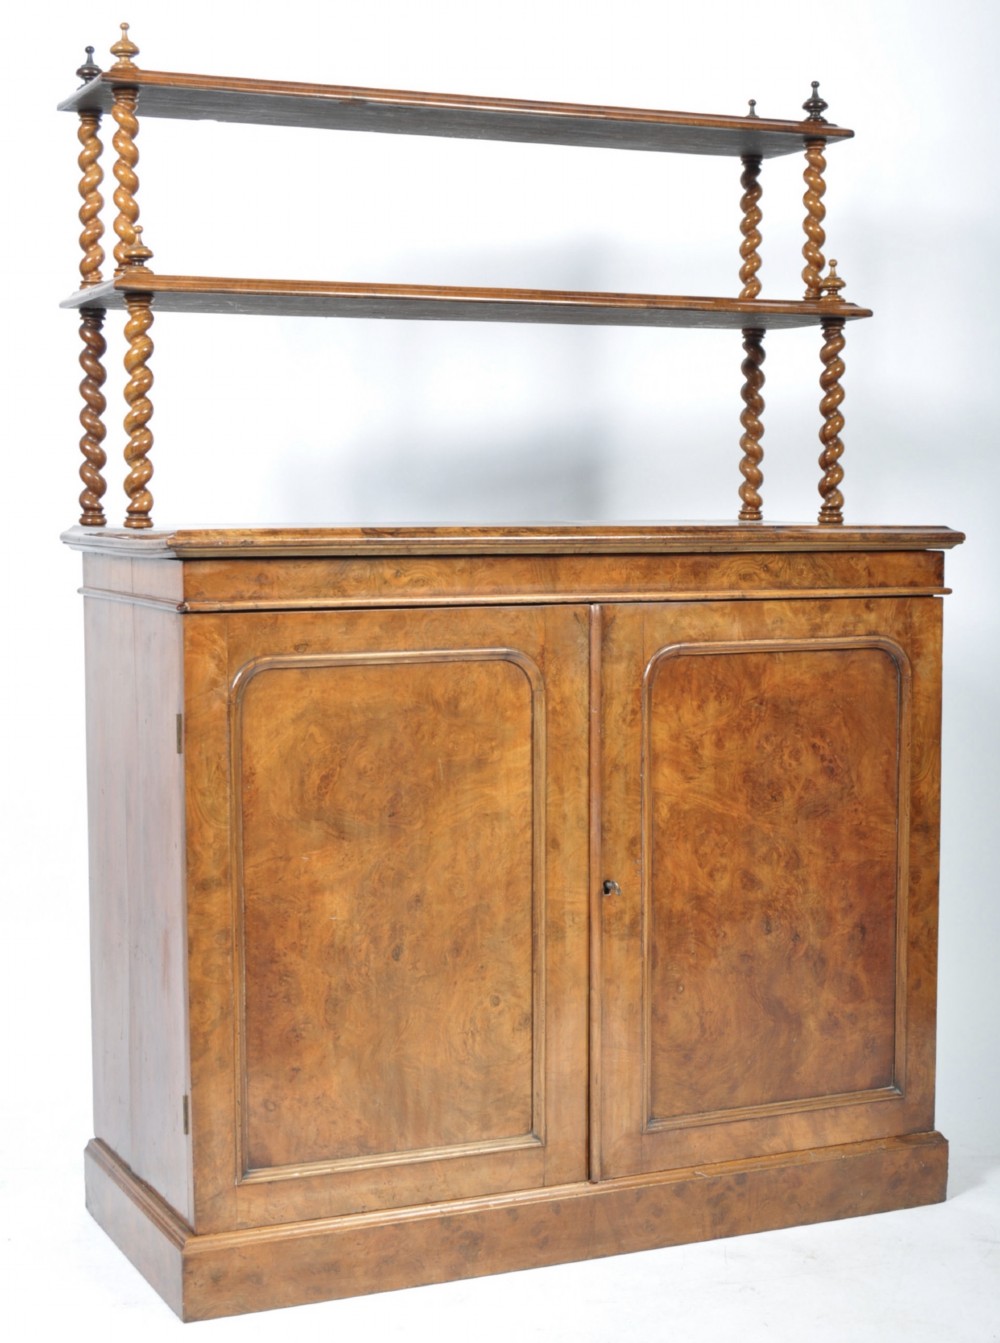 c19th burr walnut cabinet with shelves above